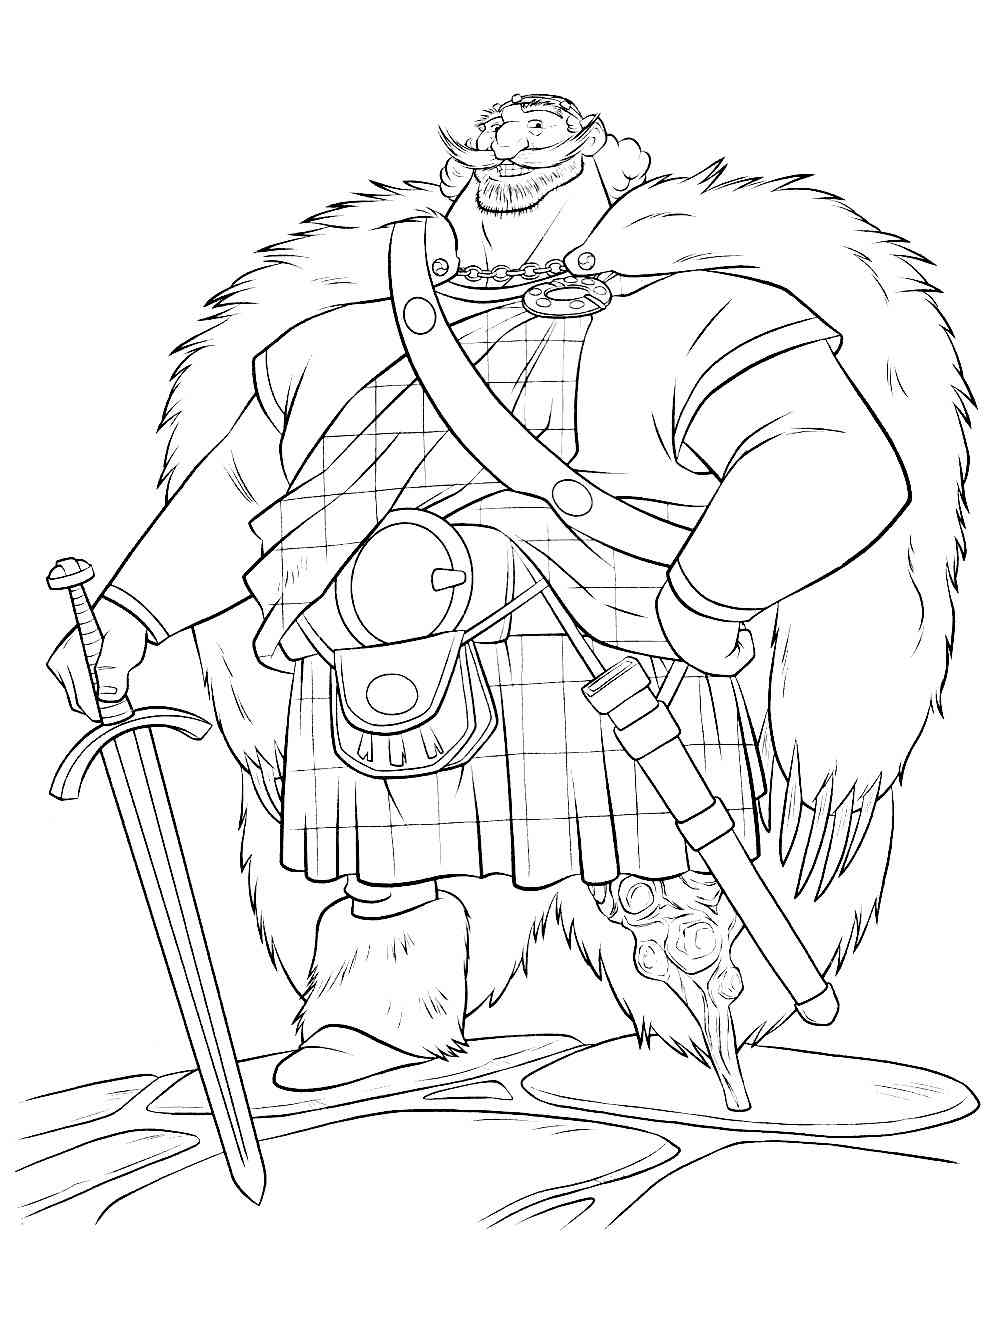 Brave 32 coloring page